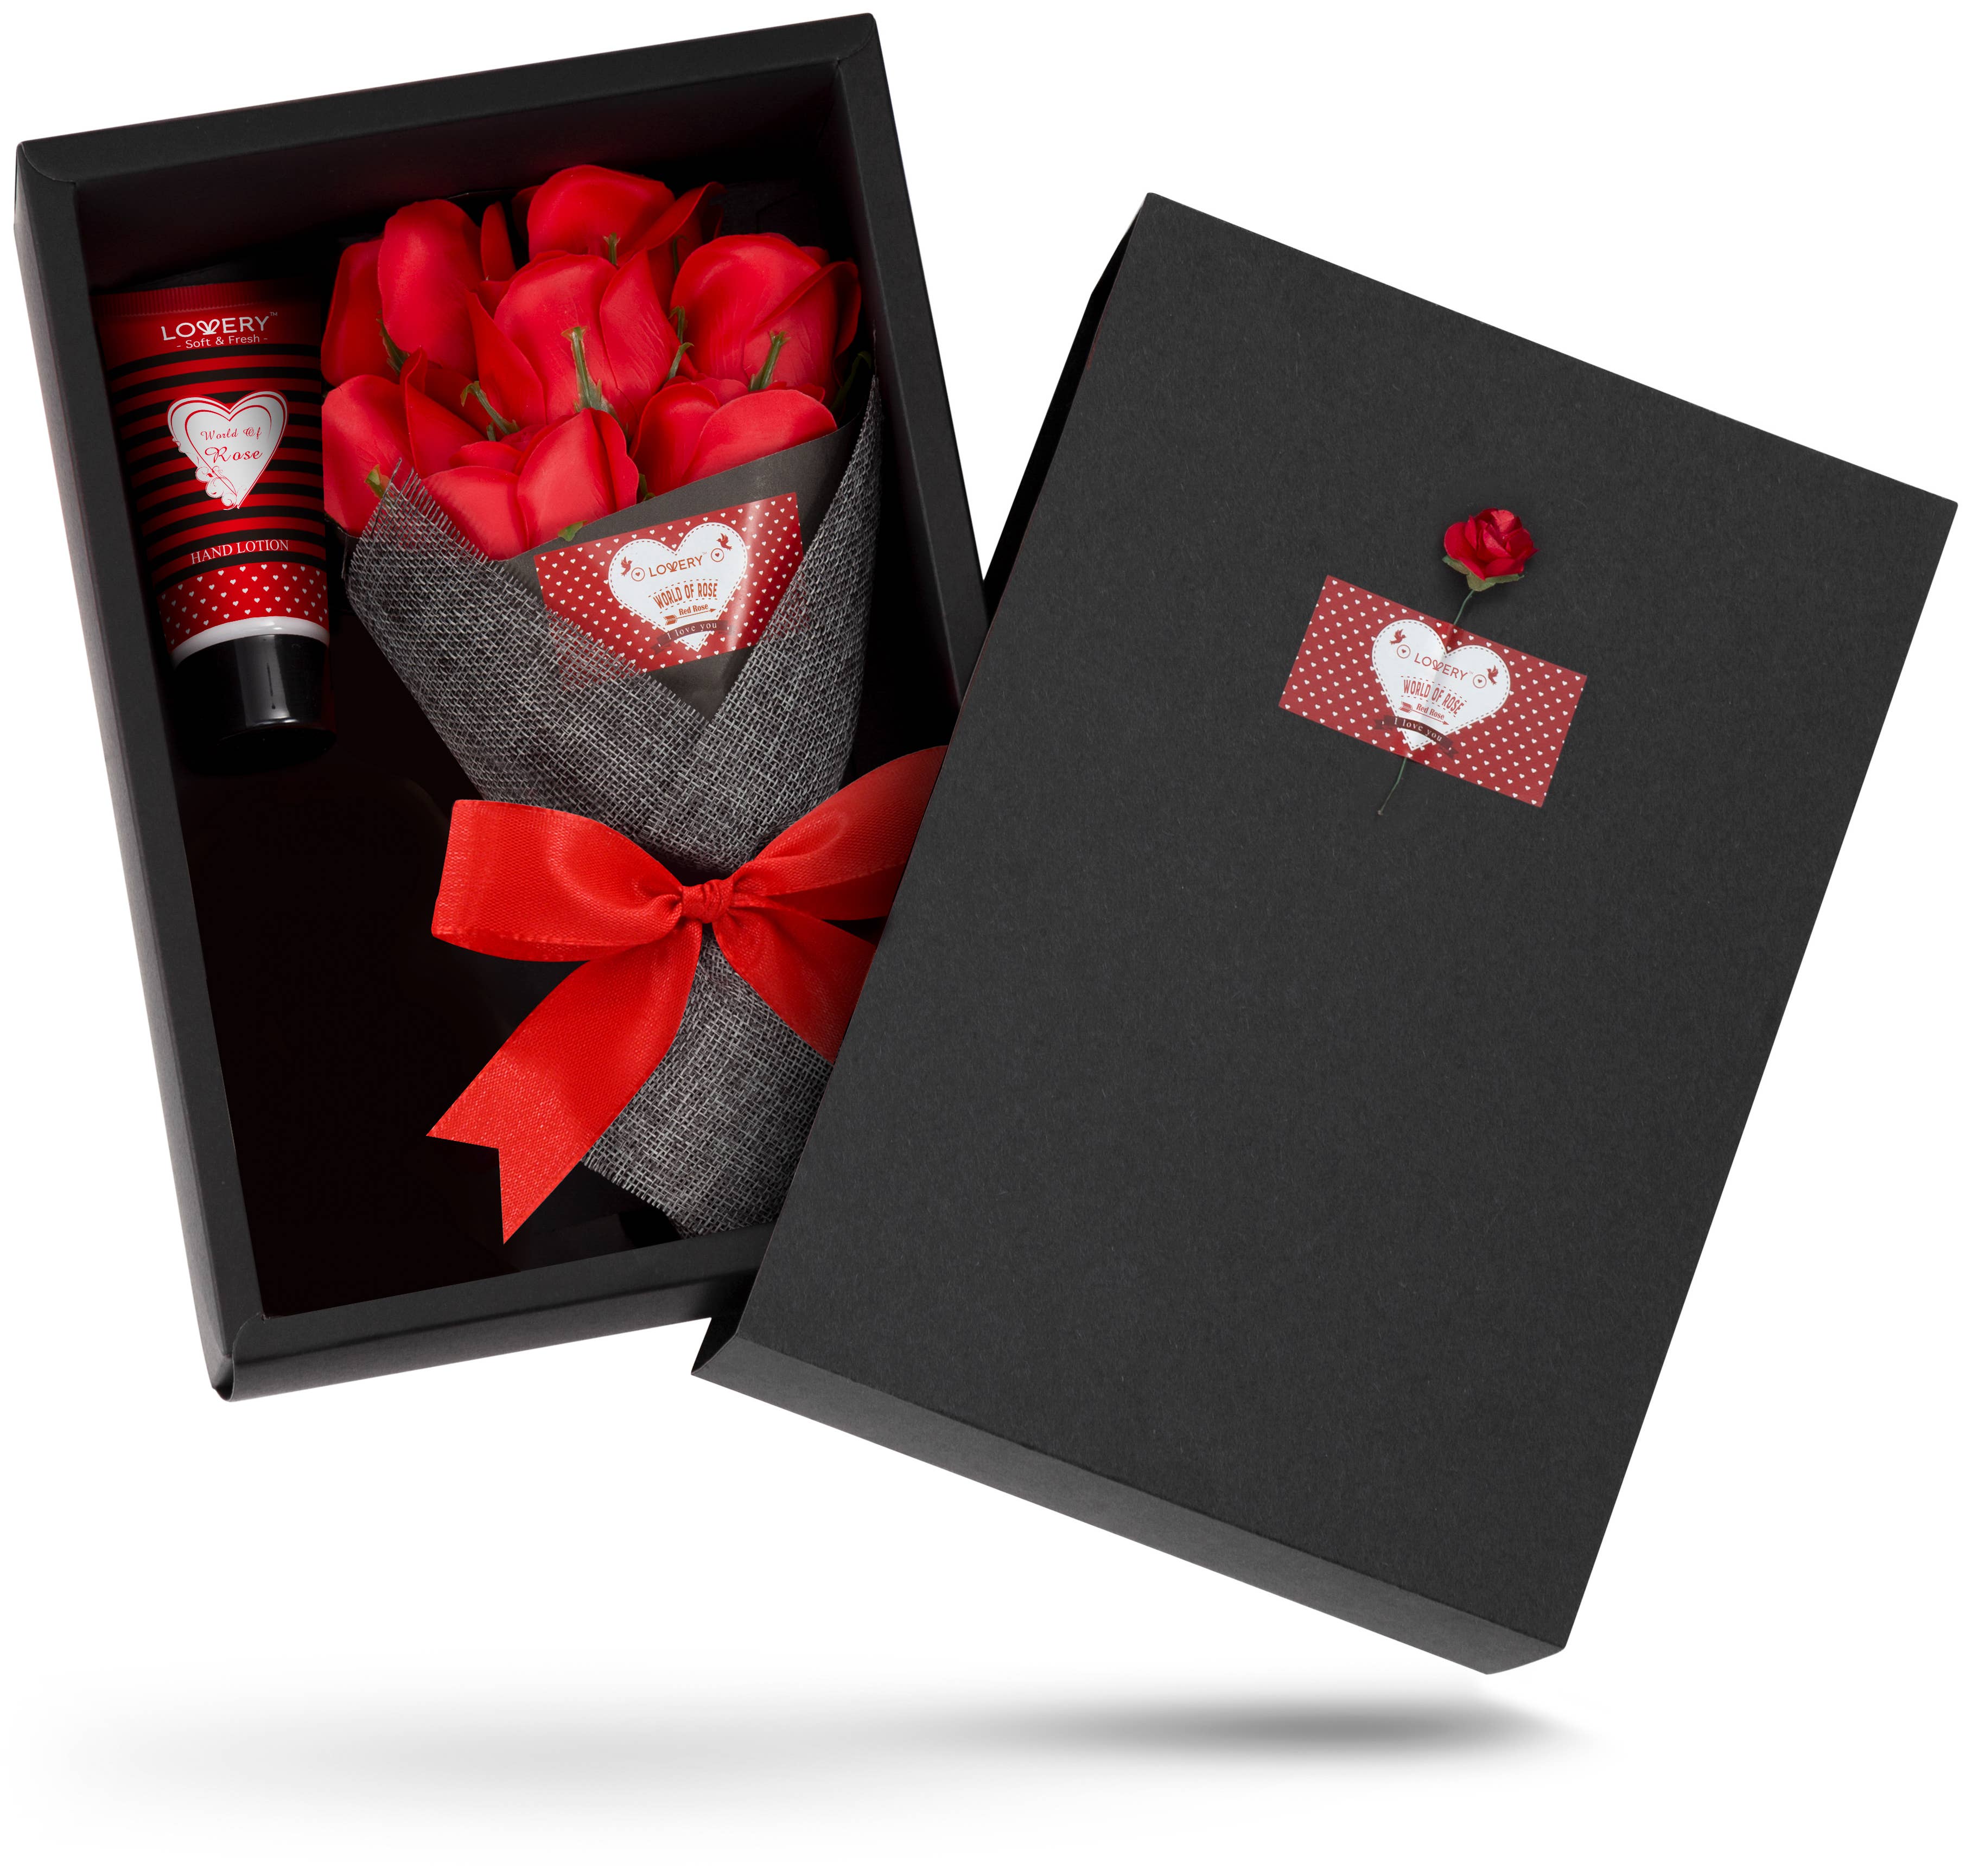 Wholesale Gift Hampers Supplier,Gift Hampers Distributor from Delhi India